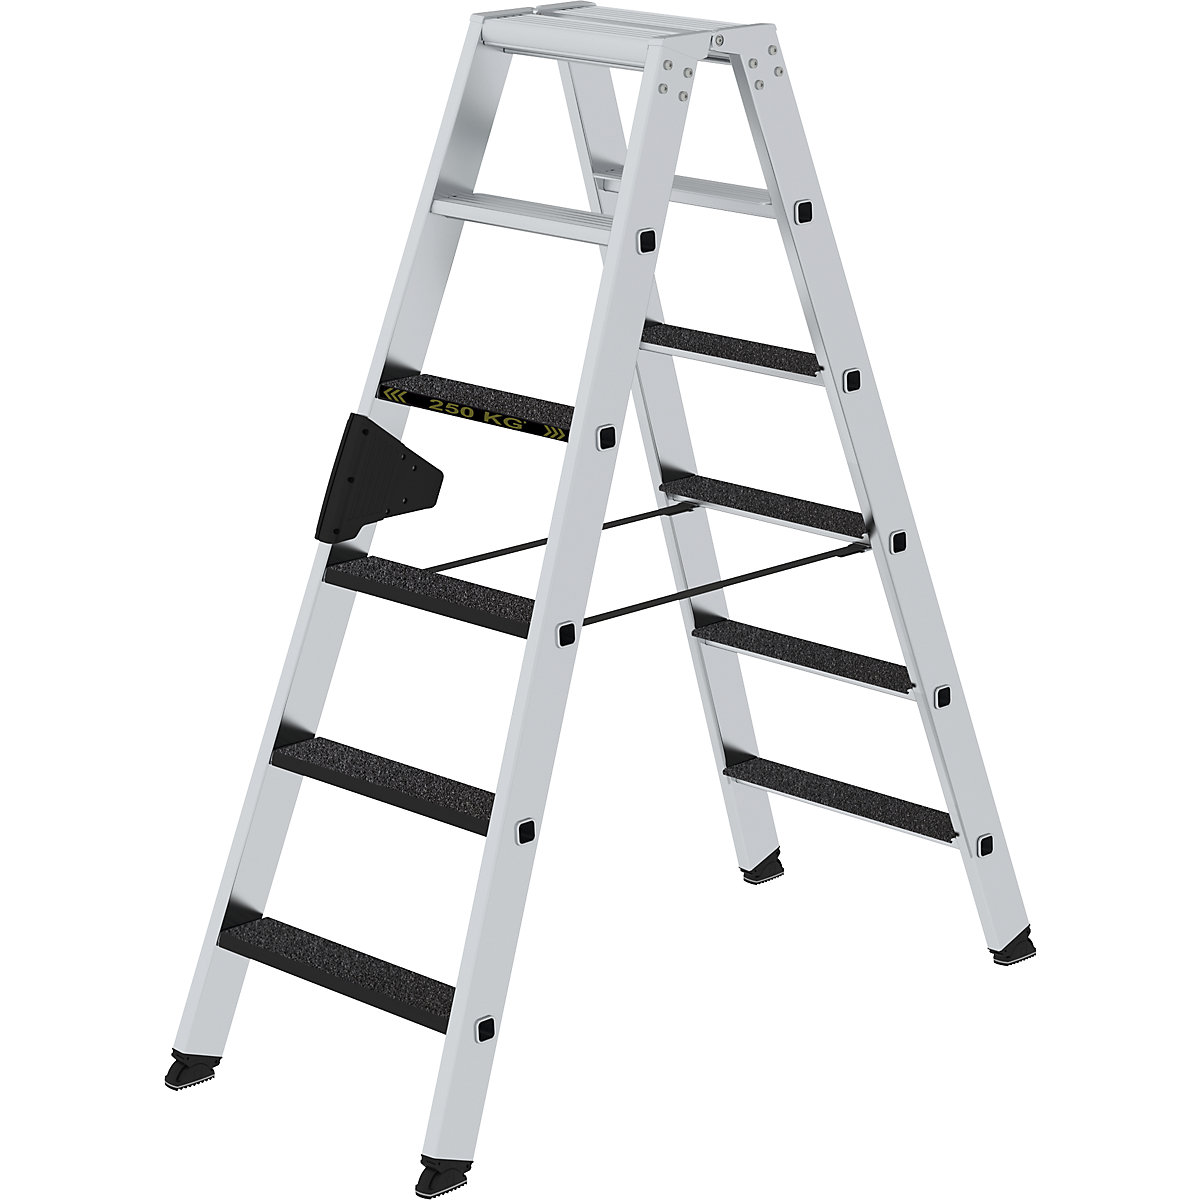 CLIP-STEP step ladder – MUNK, double sided access, slip resistant R13, heavy duty, 2 x 6 steps-8